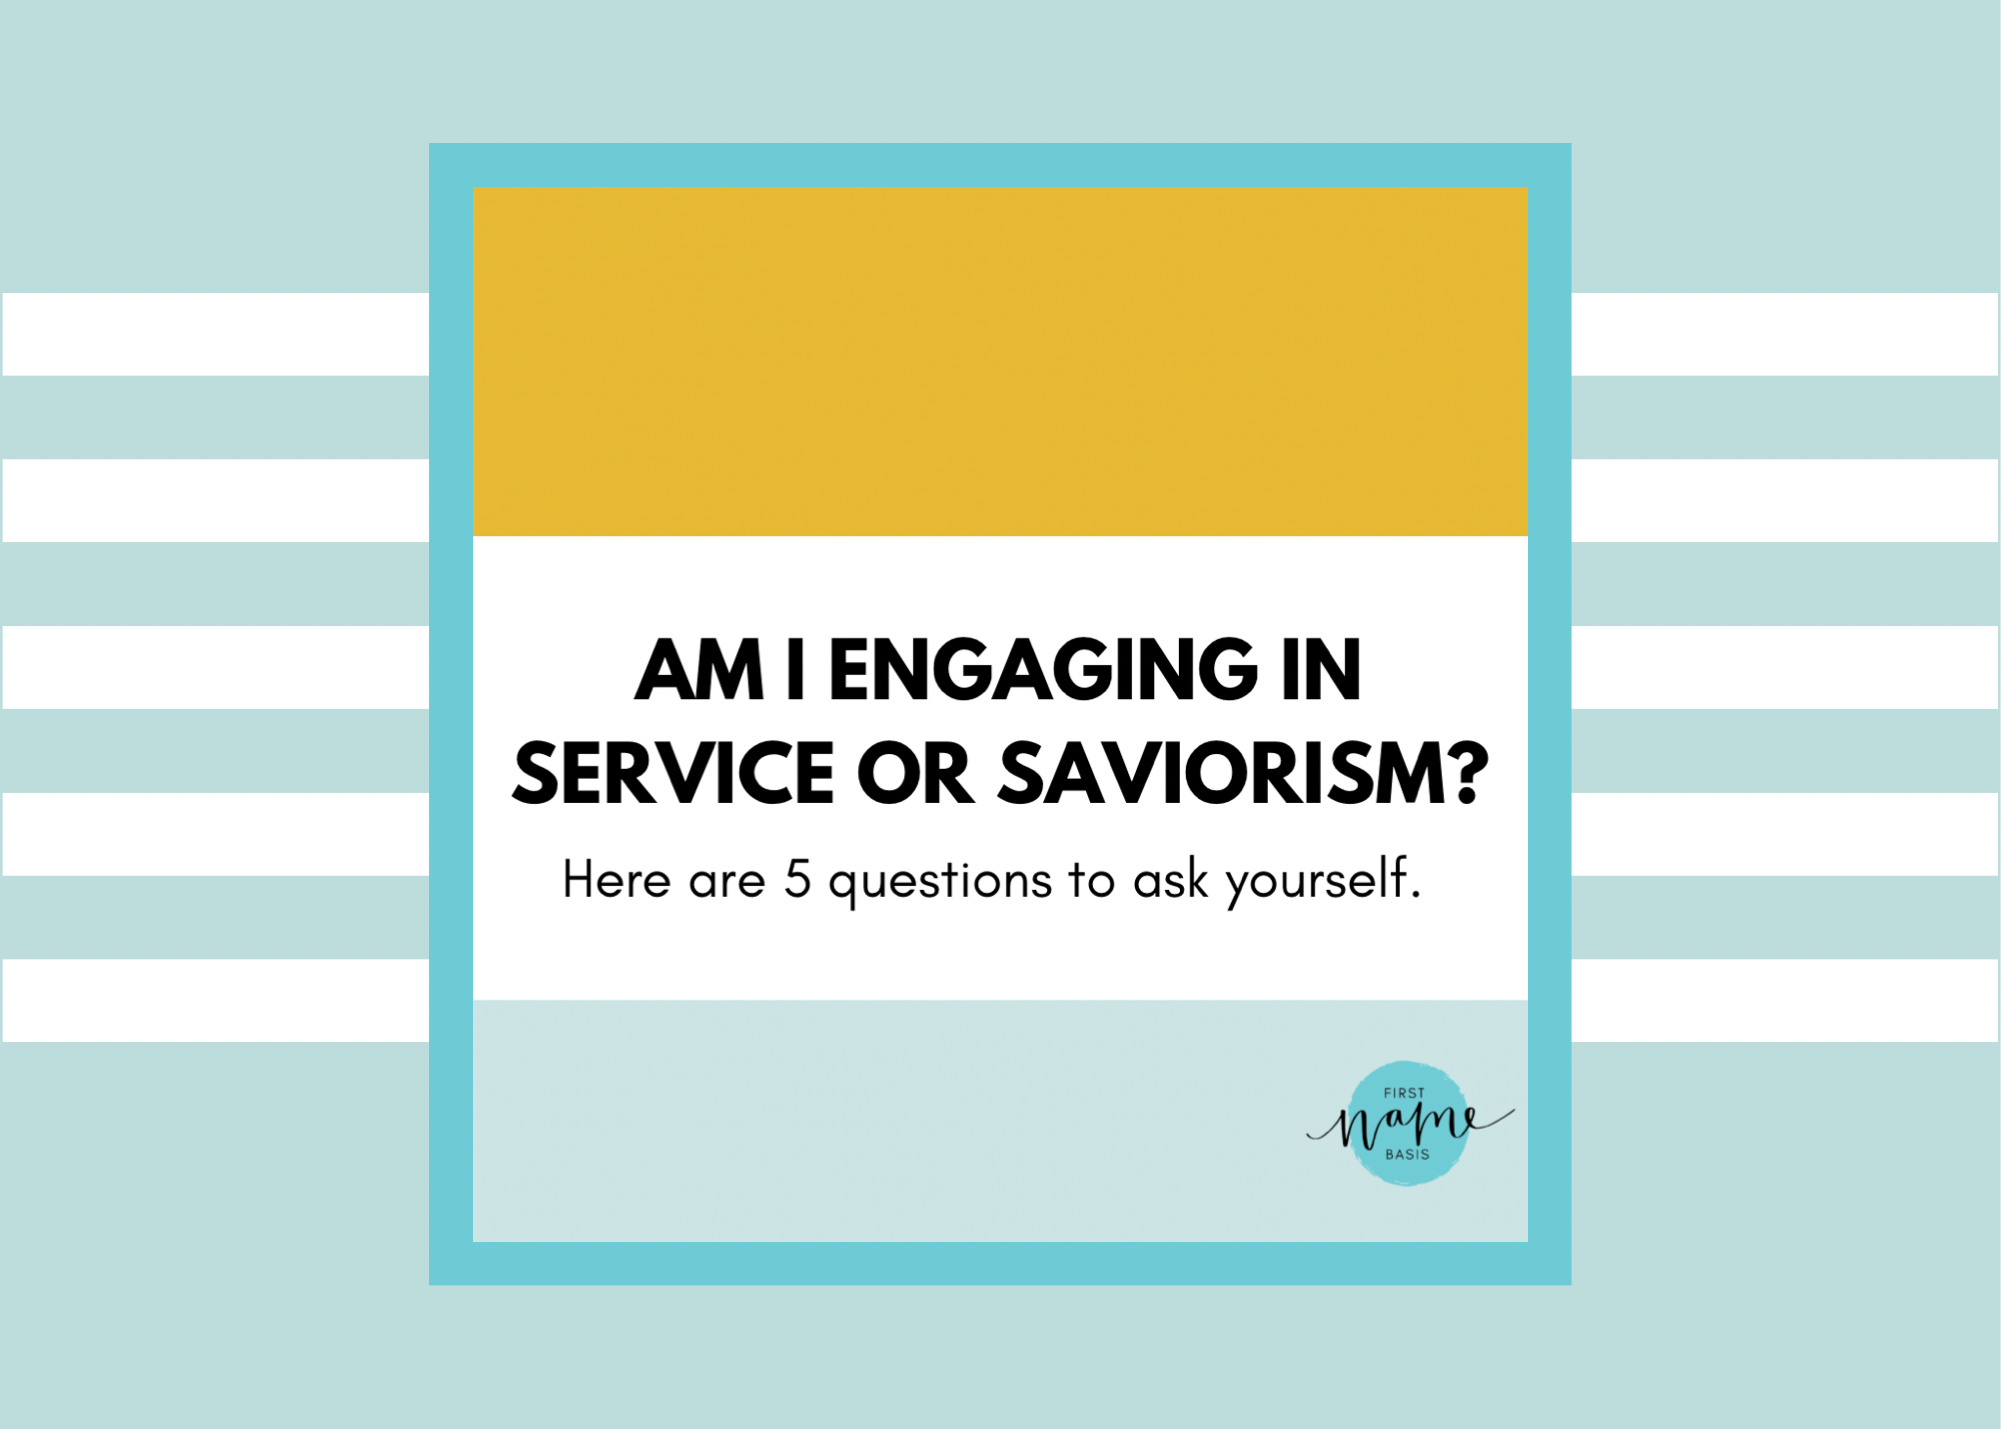 Am I Engaging in Service or Saviorism?